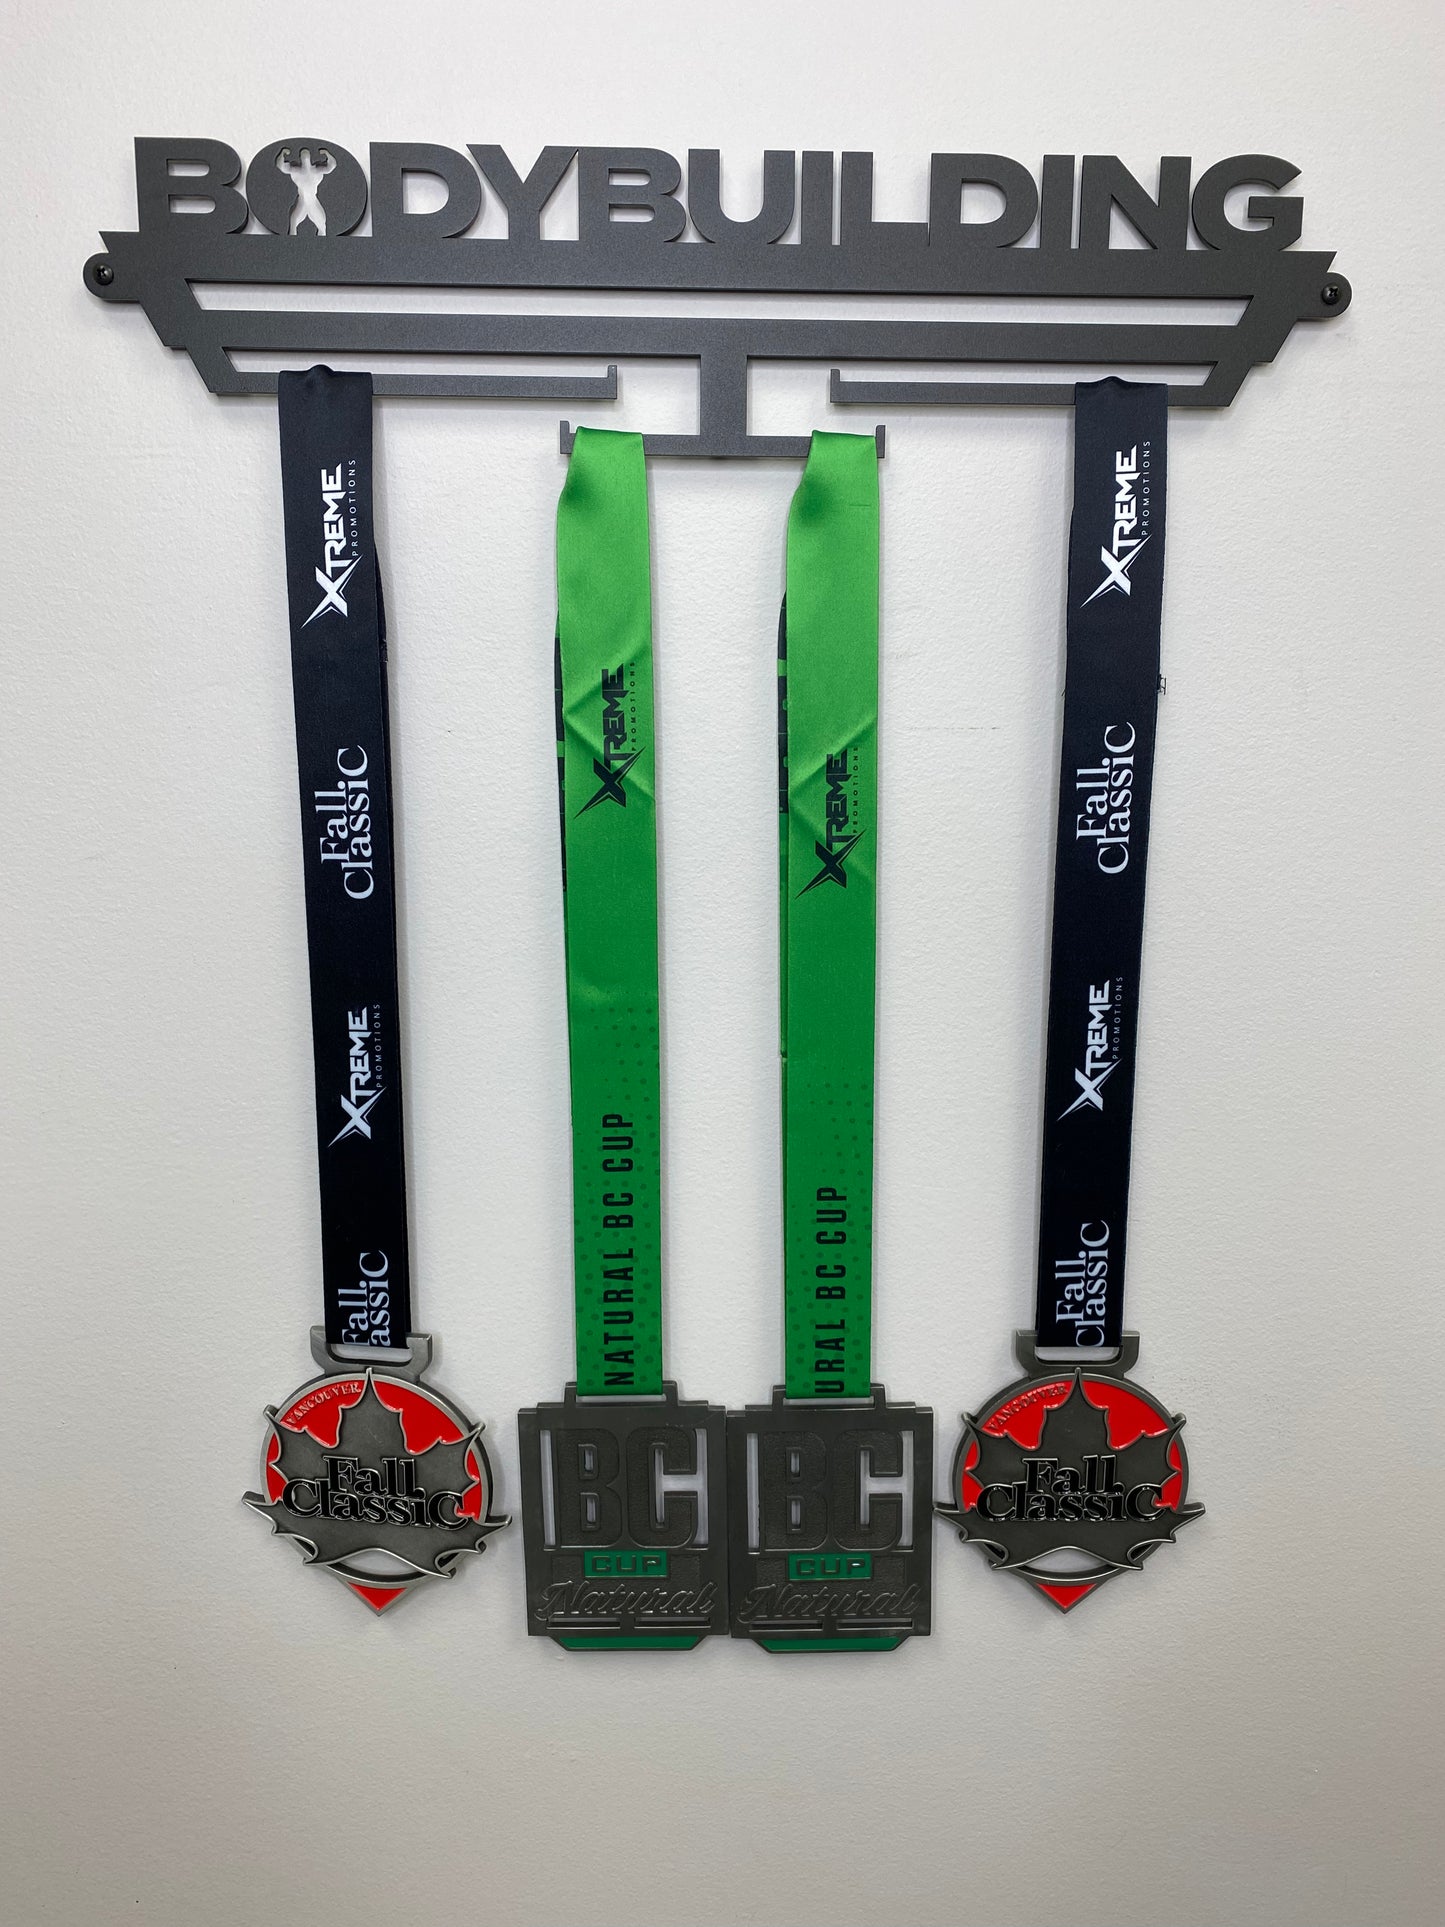 medal hanger for medallions, it reads Bodybuilding across the top with a Bodybuilder posing in the O. and has 4 bars that you can hang the lanyards off of that will display the medals. You will mount this to a wall with the screw kit provided.  Comes in black and silver